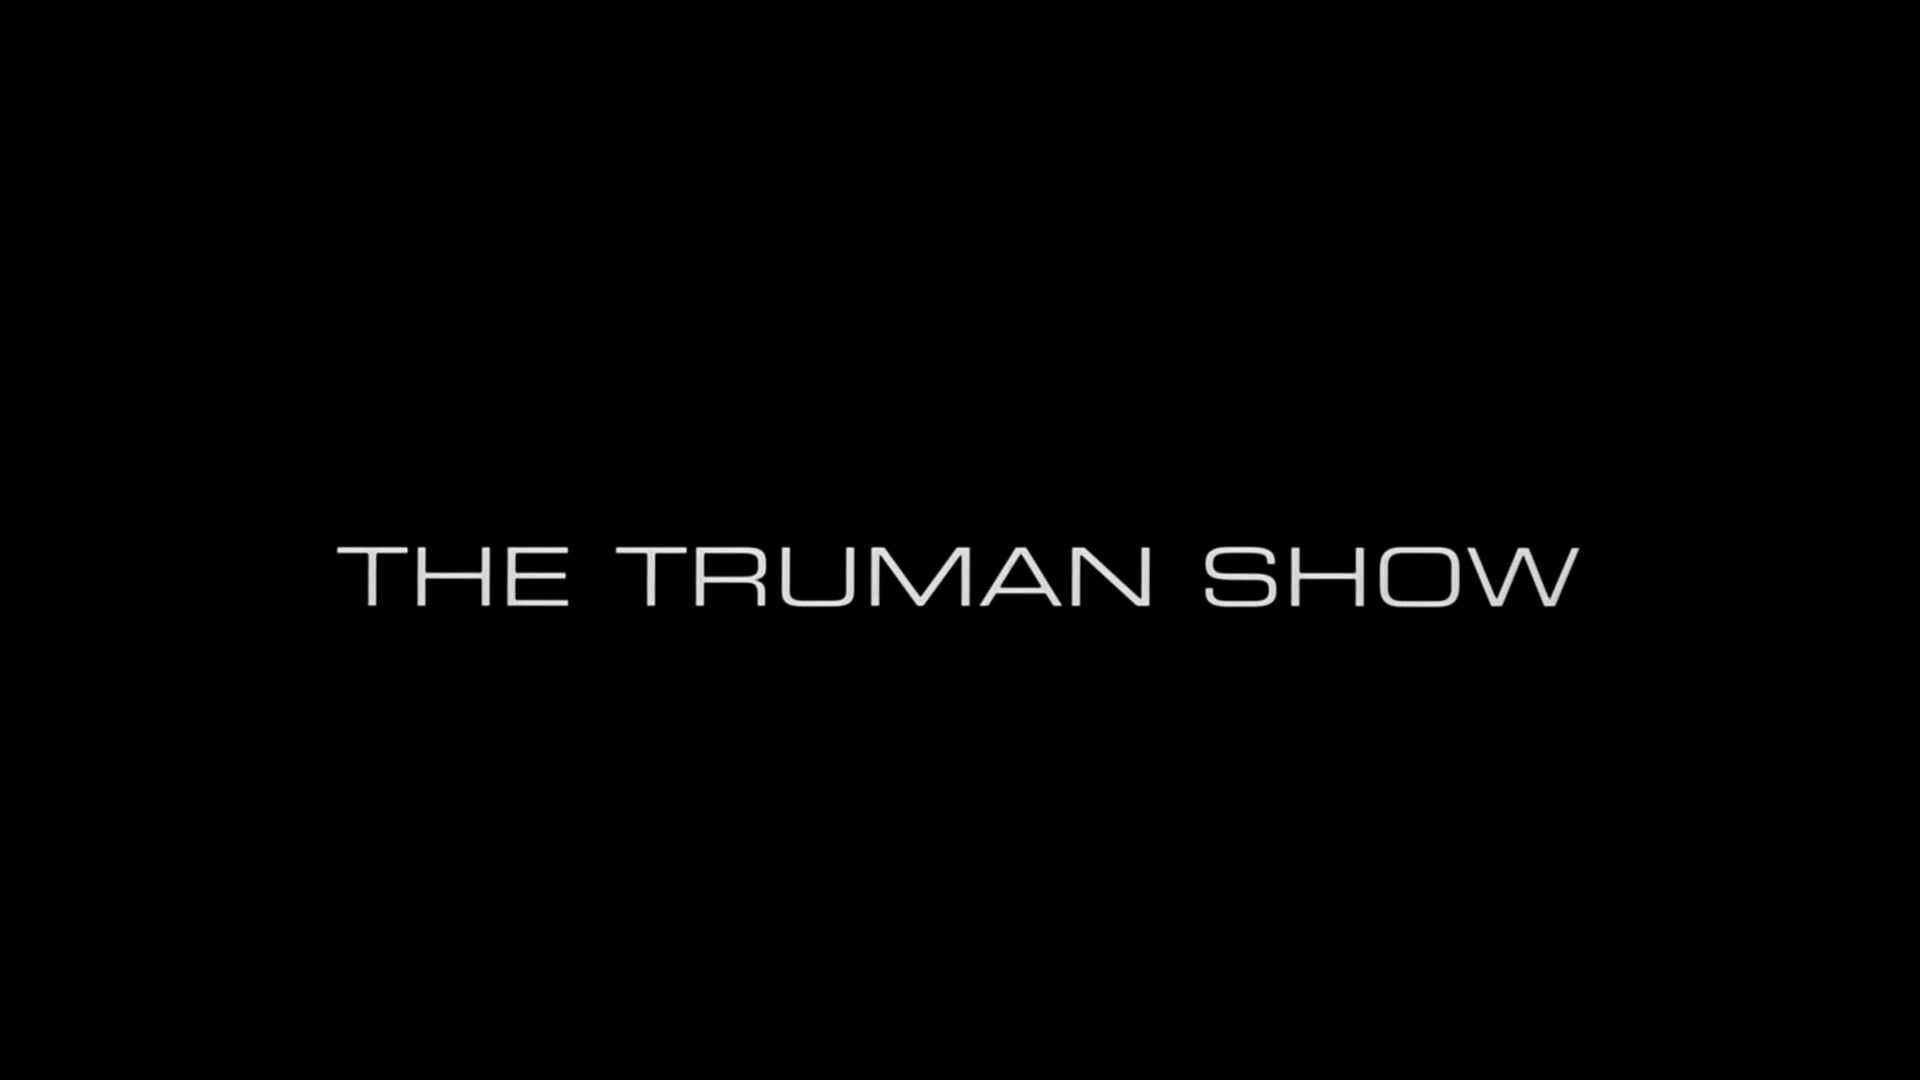 The Truman Show: A 1998 American psychological satirical comedy-drama film directed by Peter Weir, produced by Scott Rudin. 1920x1080 Full HD Wallpaper.